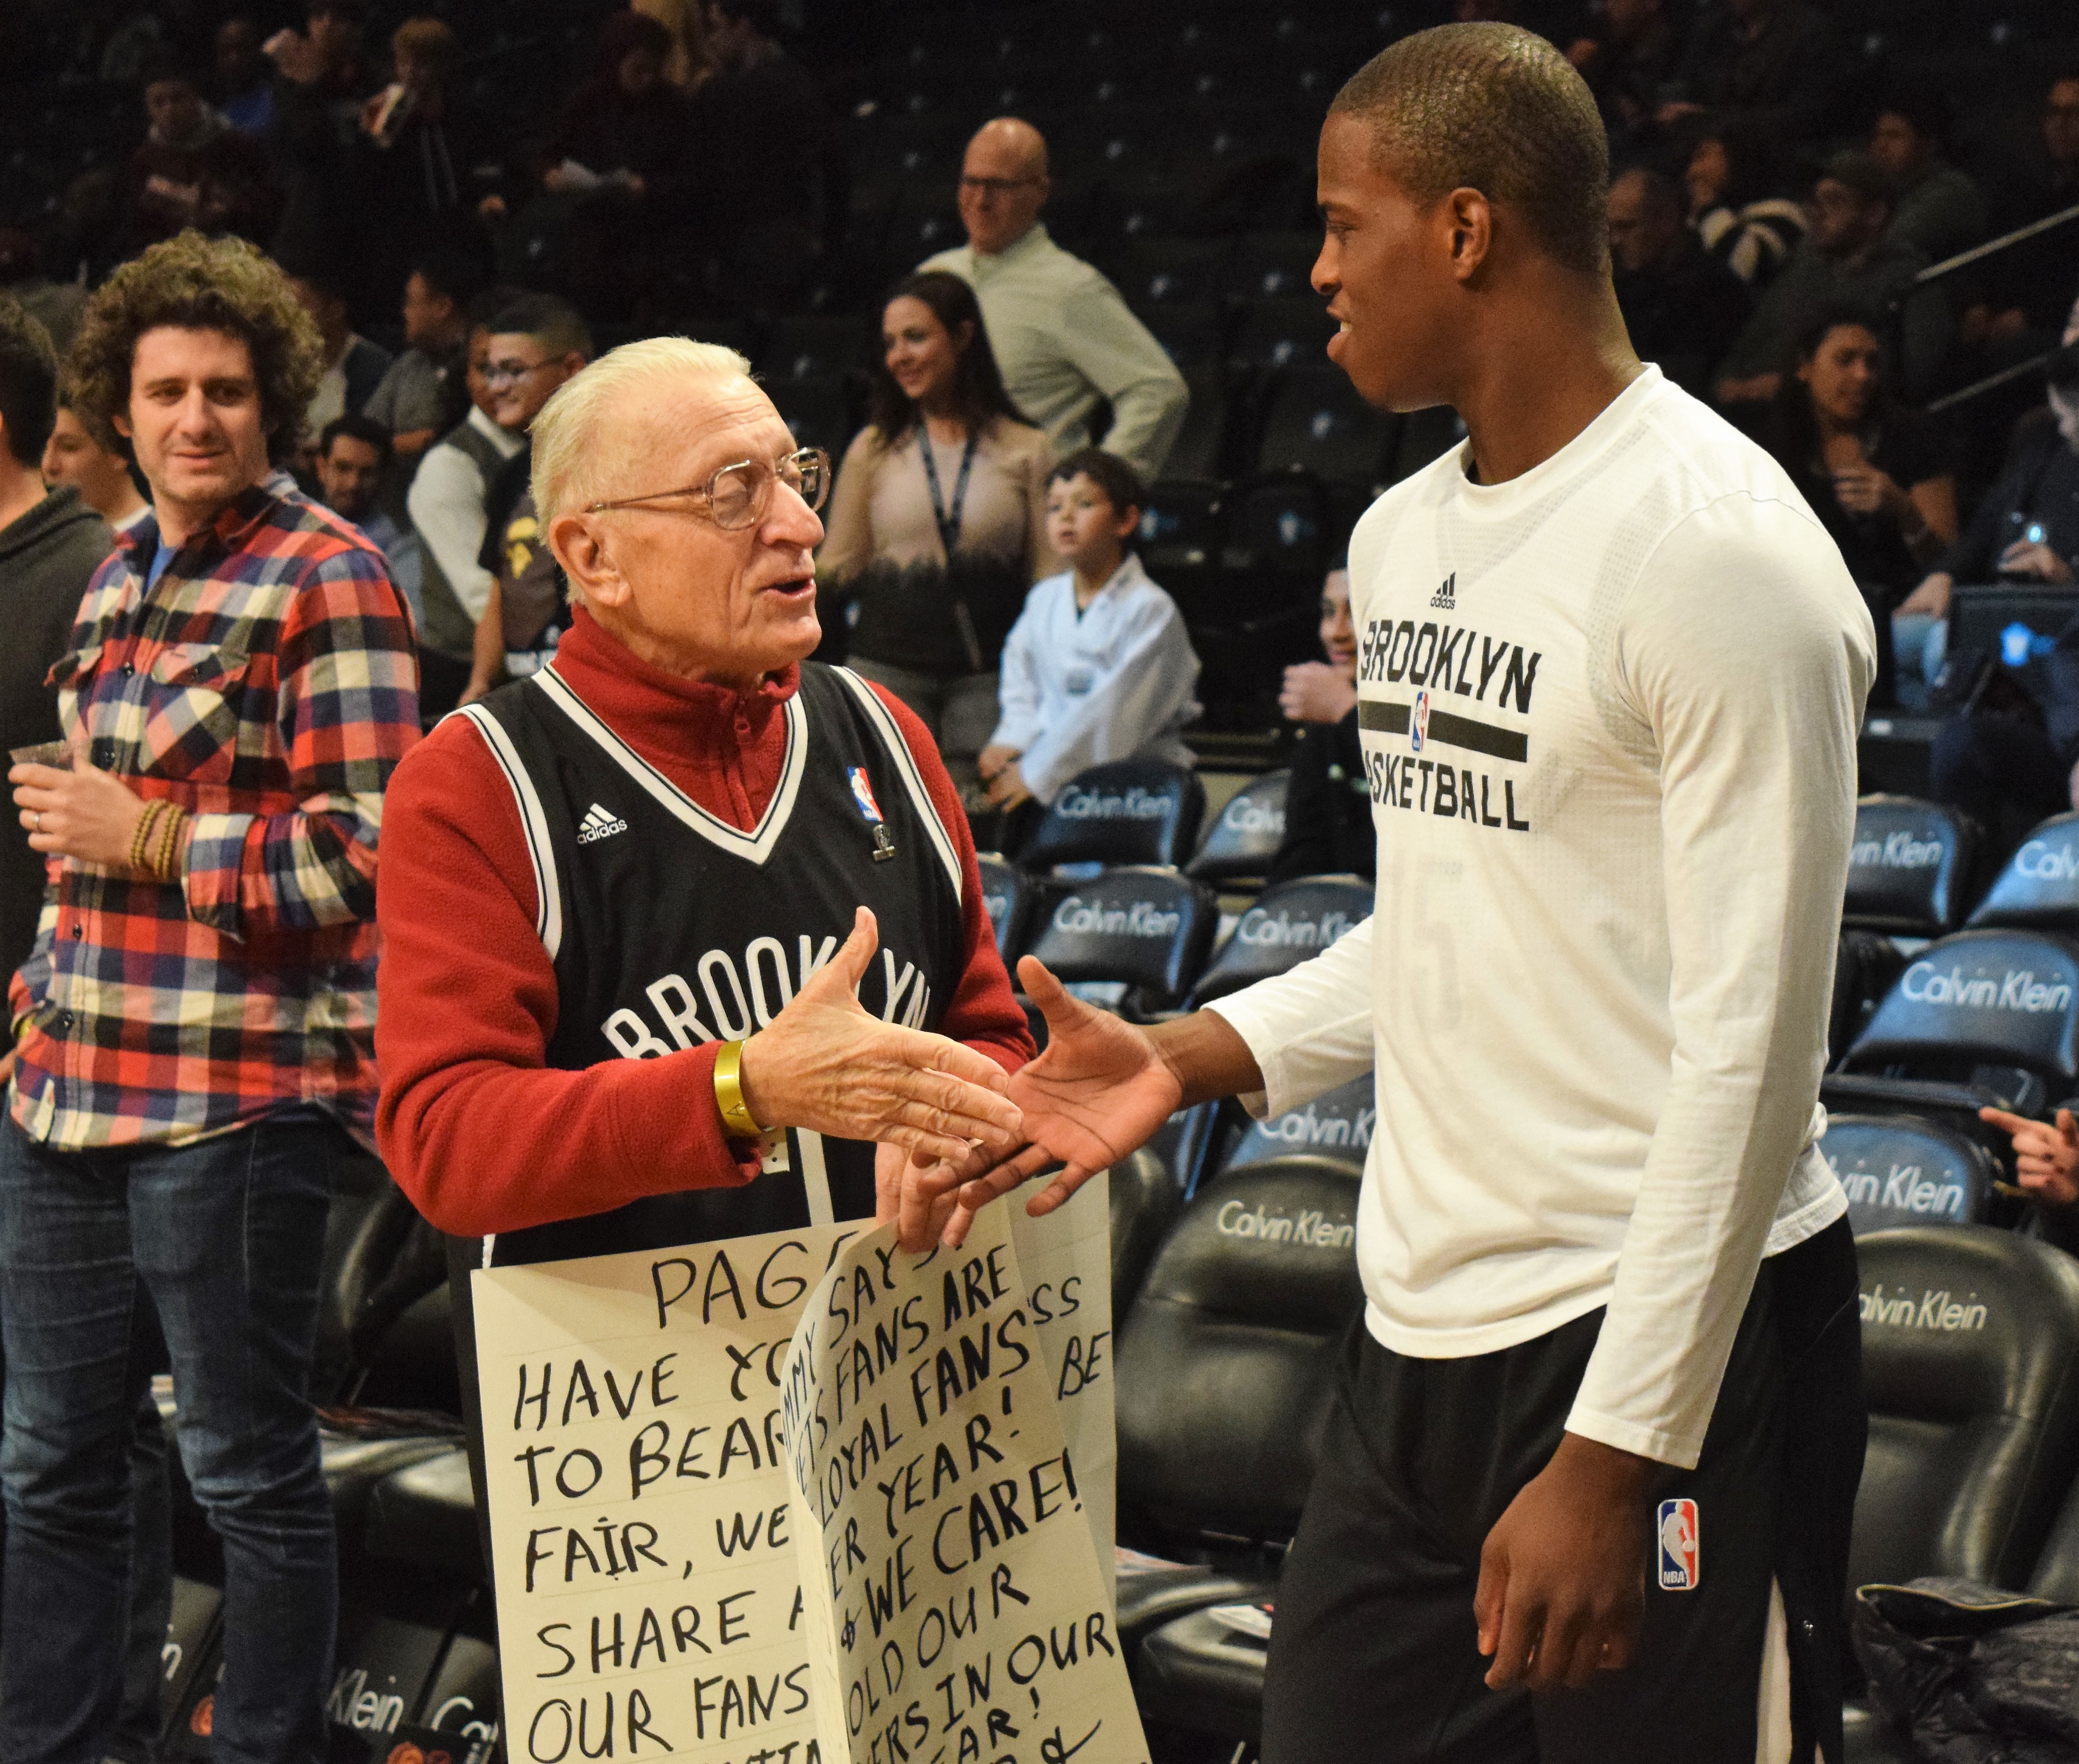 (Photo Credit: Barry Holmes) Whitehead is really starting to fit in here in Brooklyn.